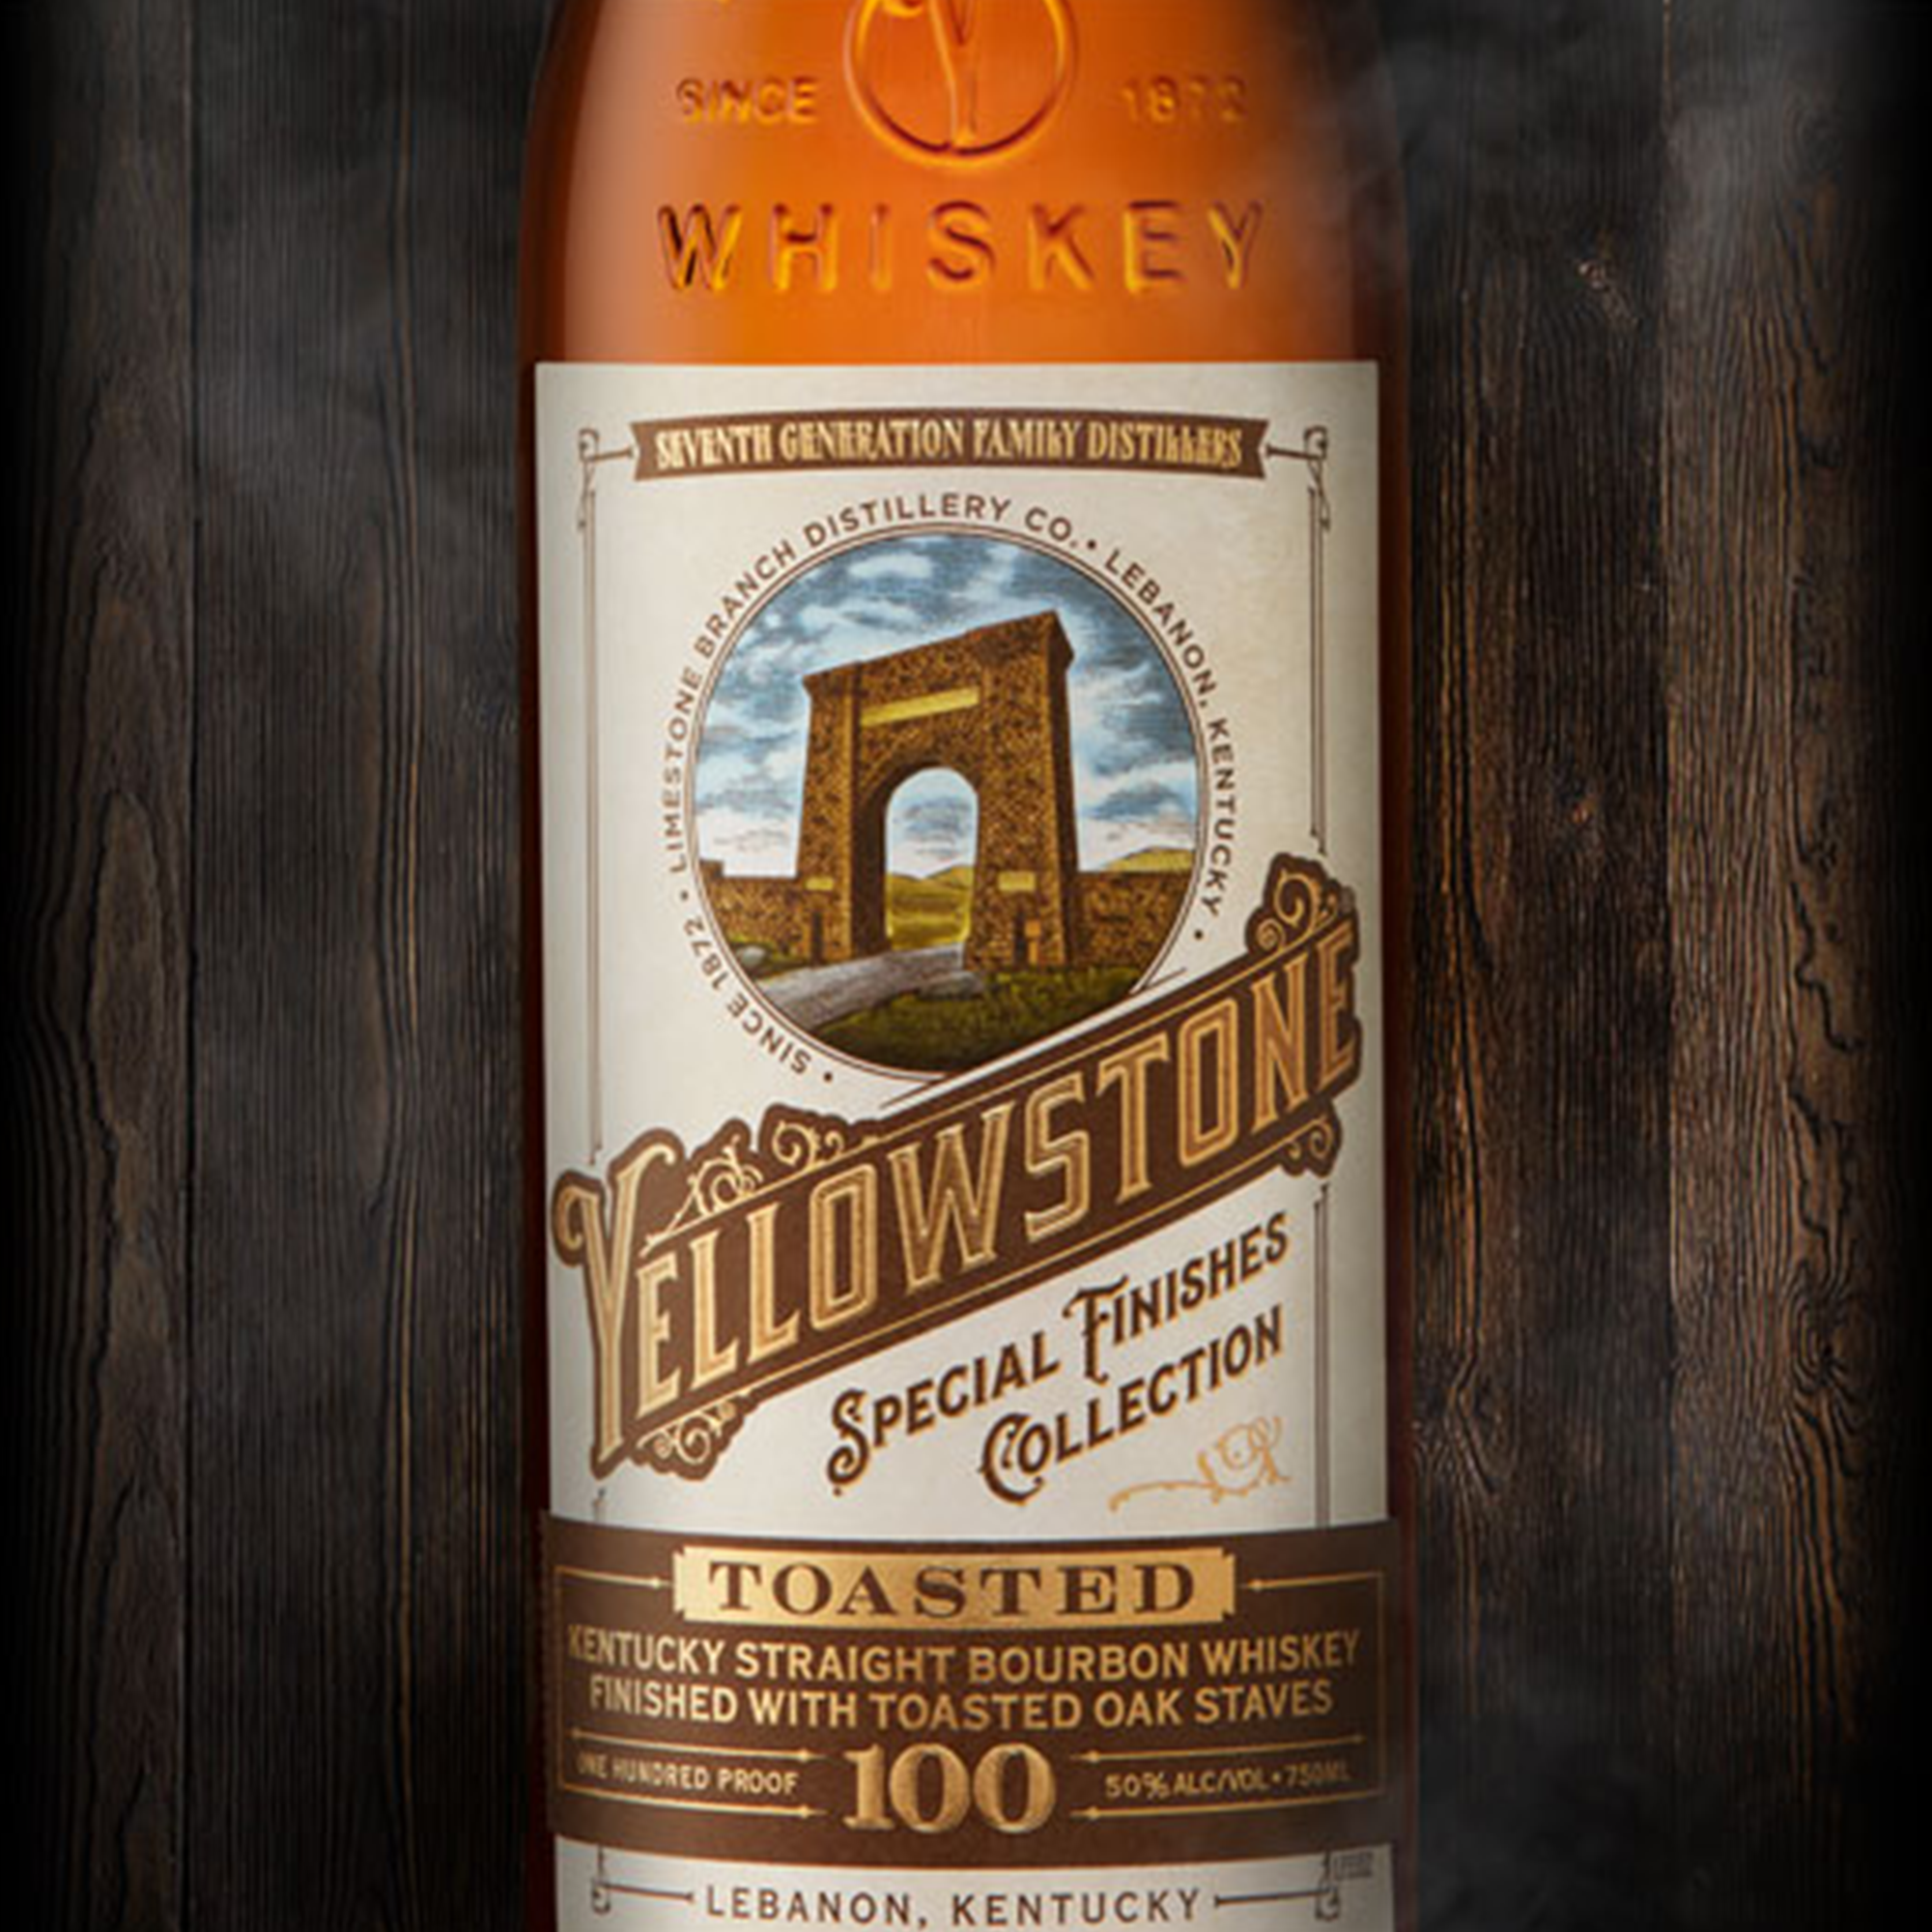 Yellowstone Toasted Special Finishes Collections Bourbon